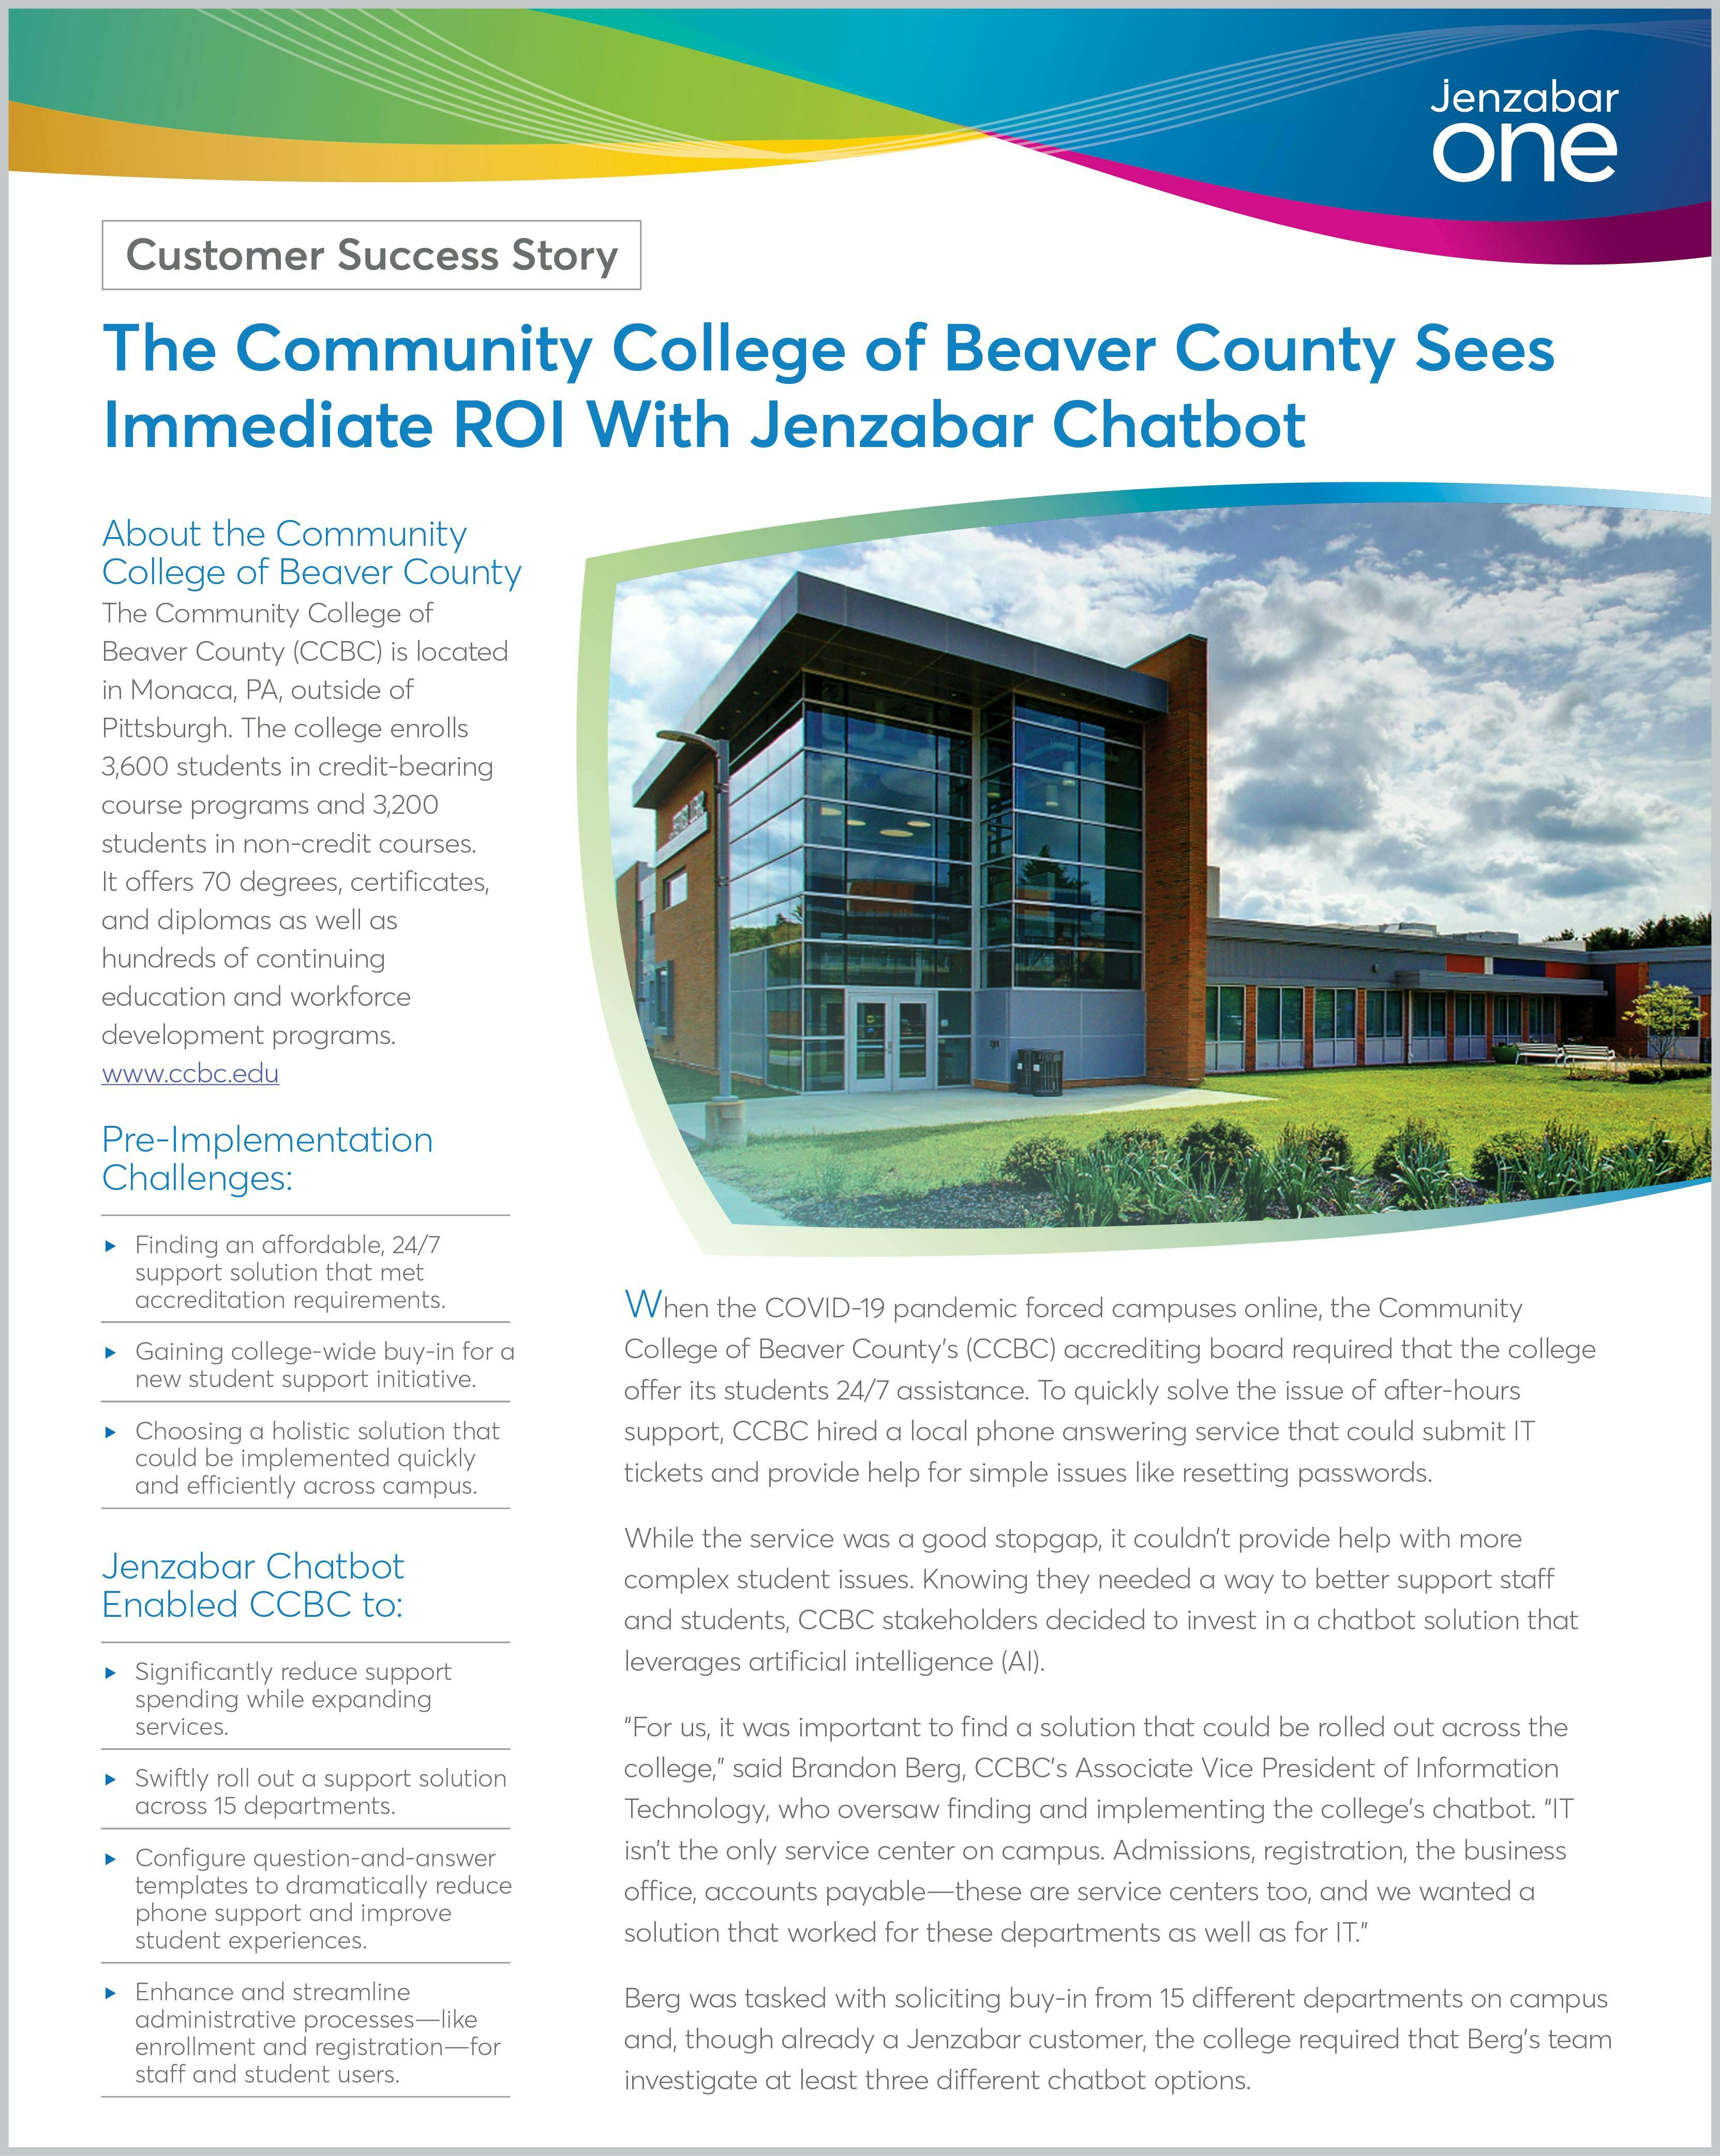 Case Study: The Community College of Beaver County Sees Immediate ROI With Jenzabar Chatbot